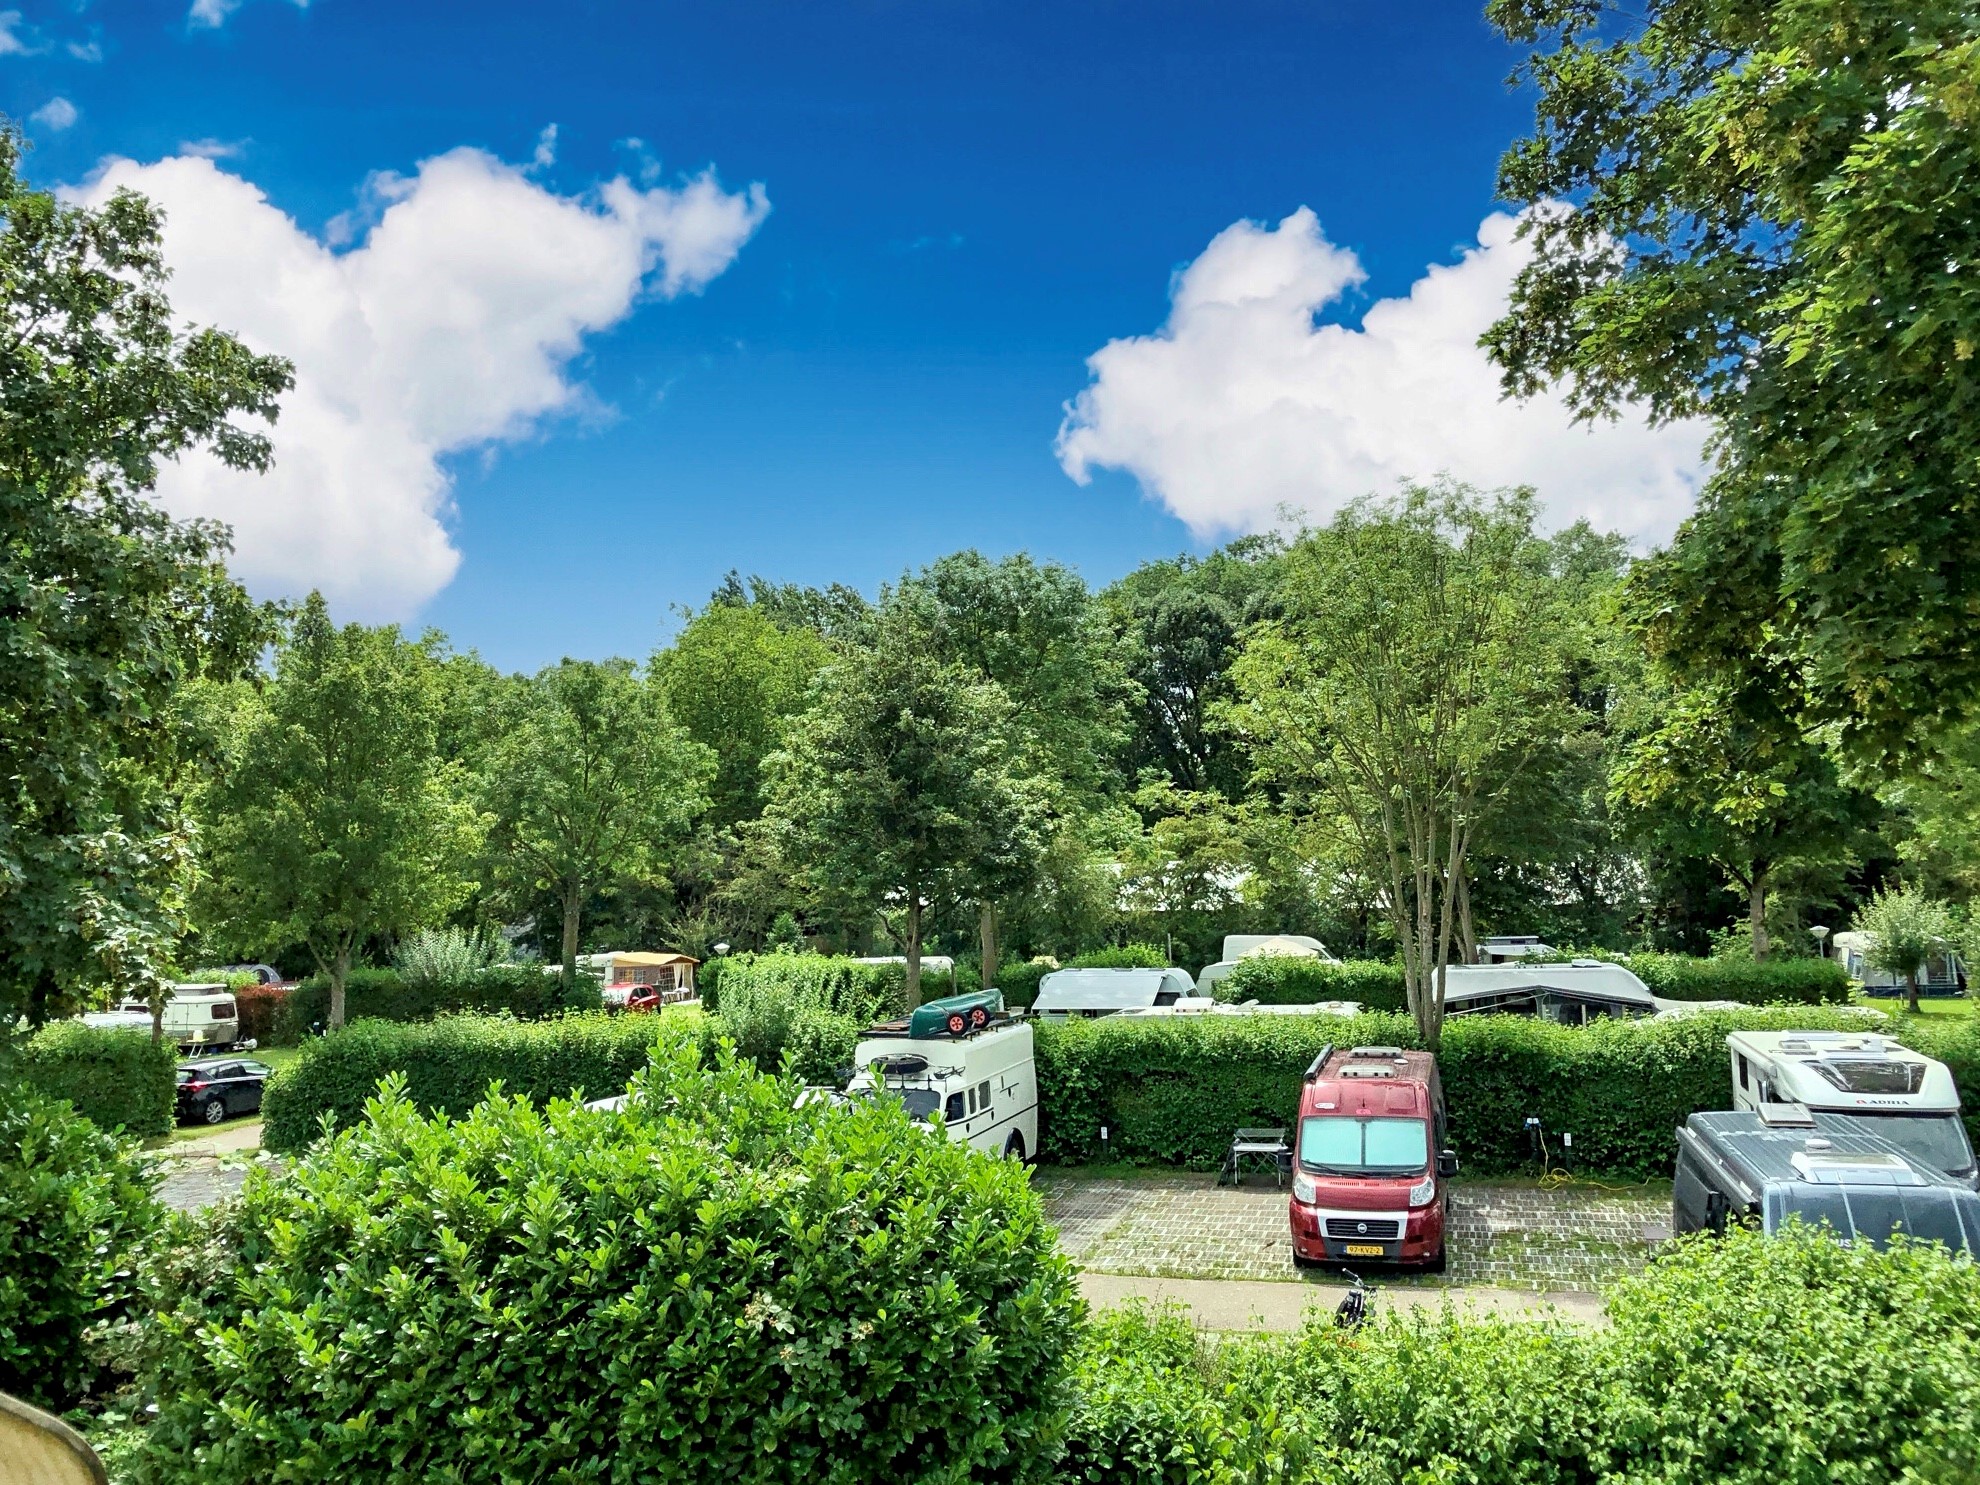 Emplacement - Emplacement Camping Car - Camping Delftse Hout